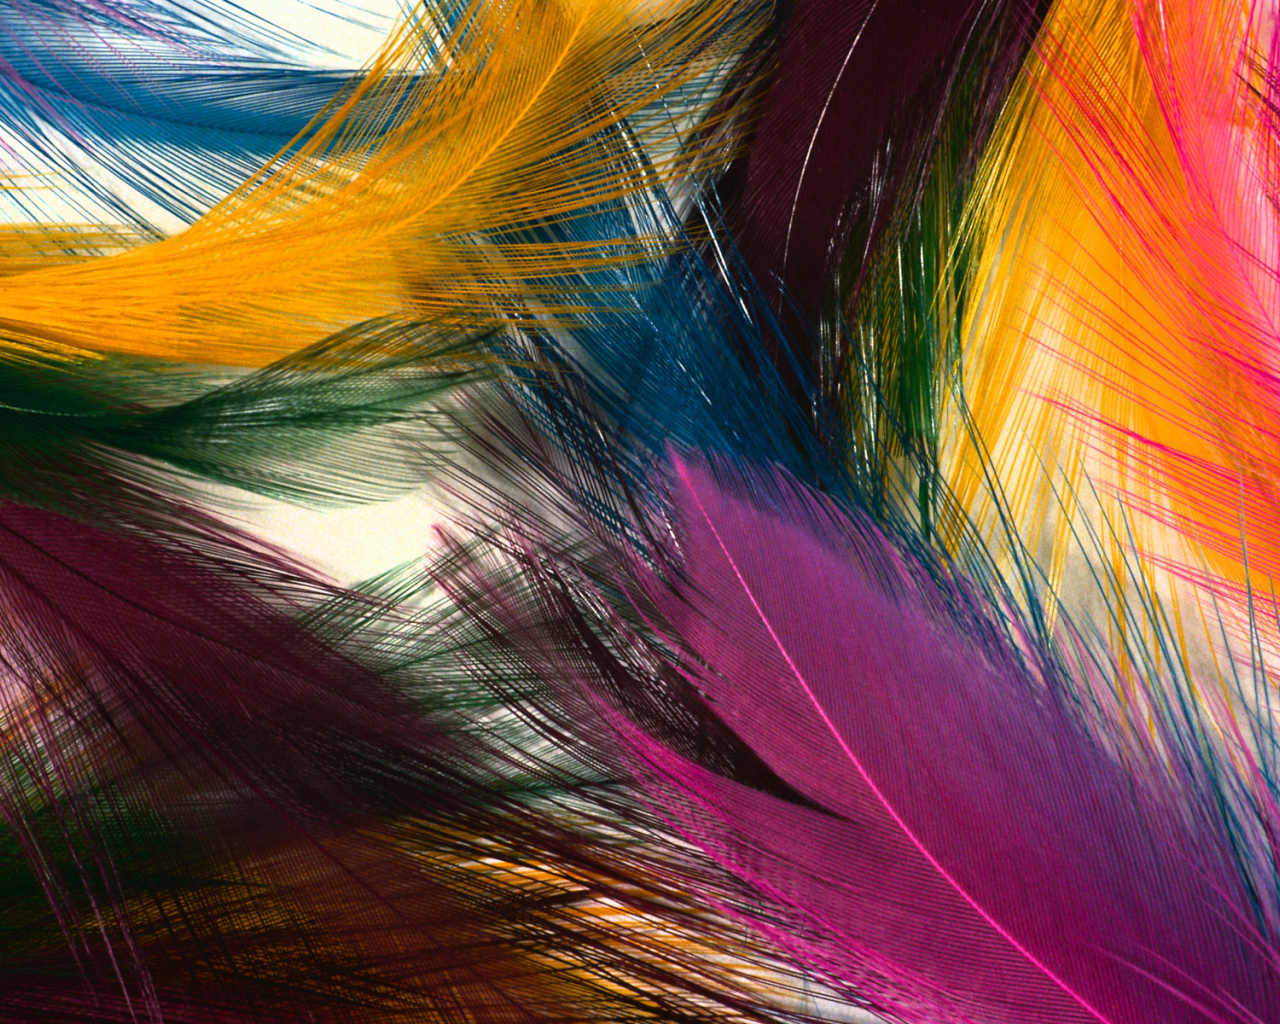 Multi-colored feathers